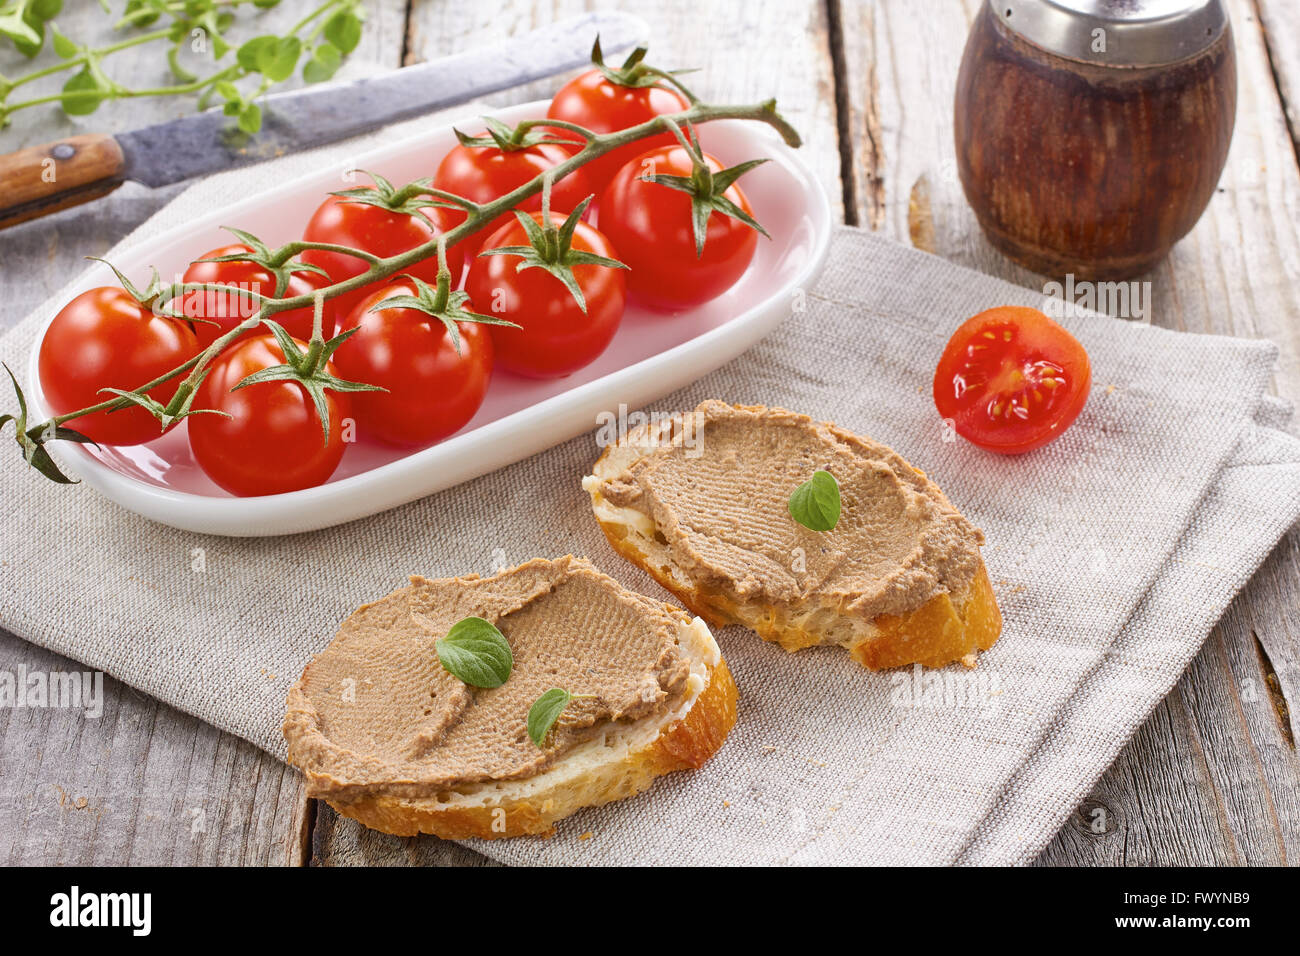 Bread with chicken liver pate and tomatoes Stock Photo